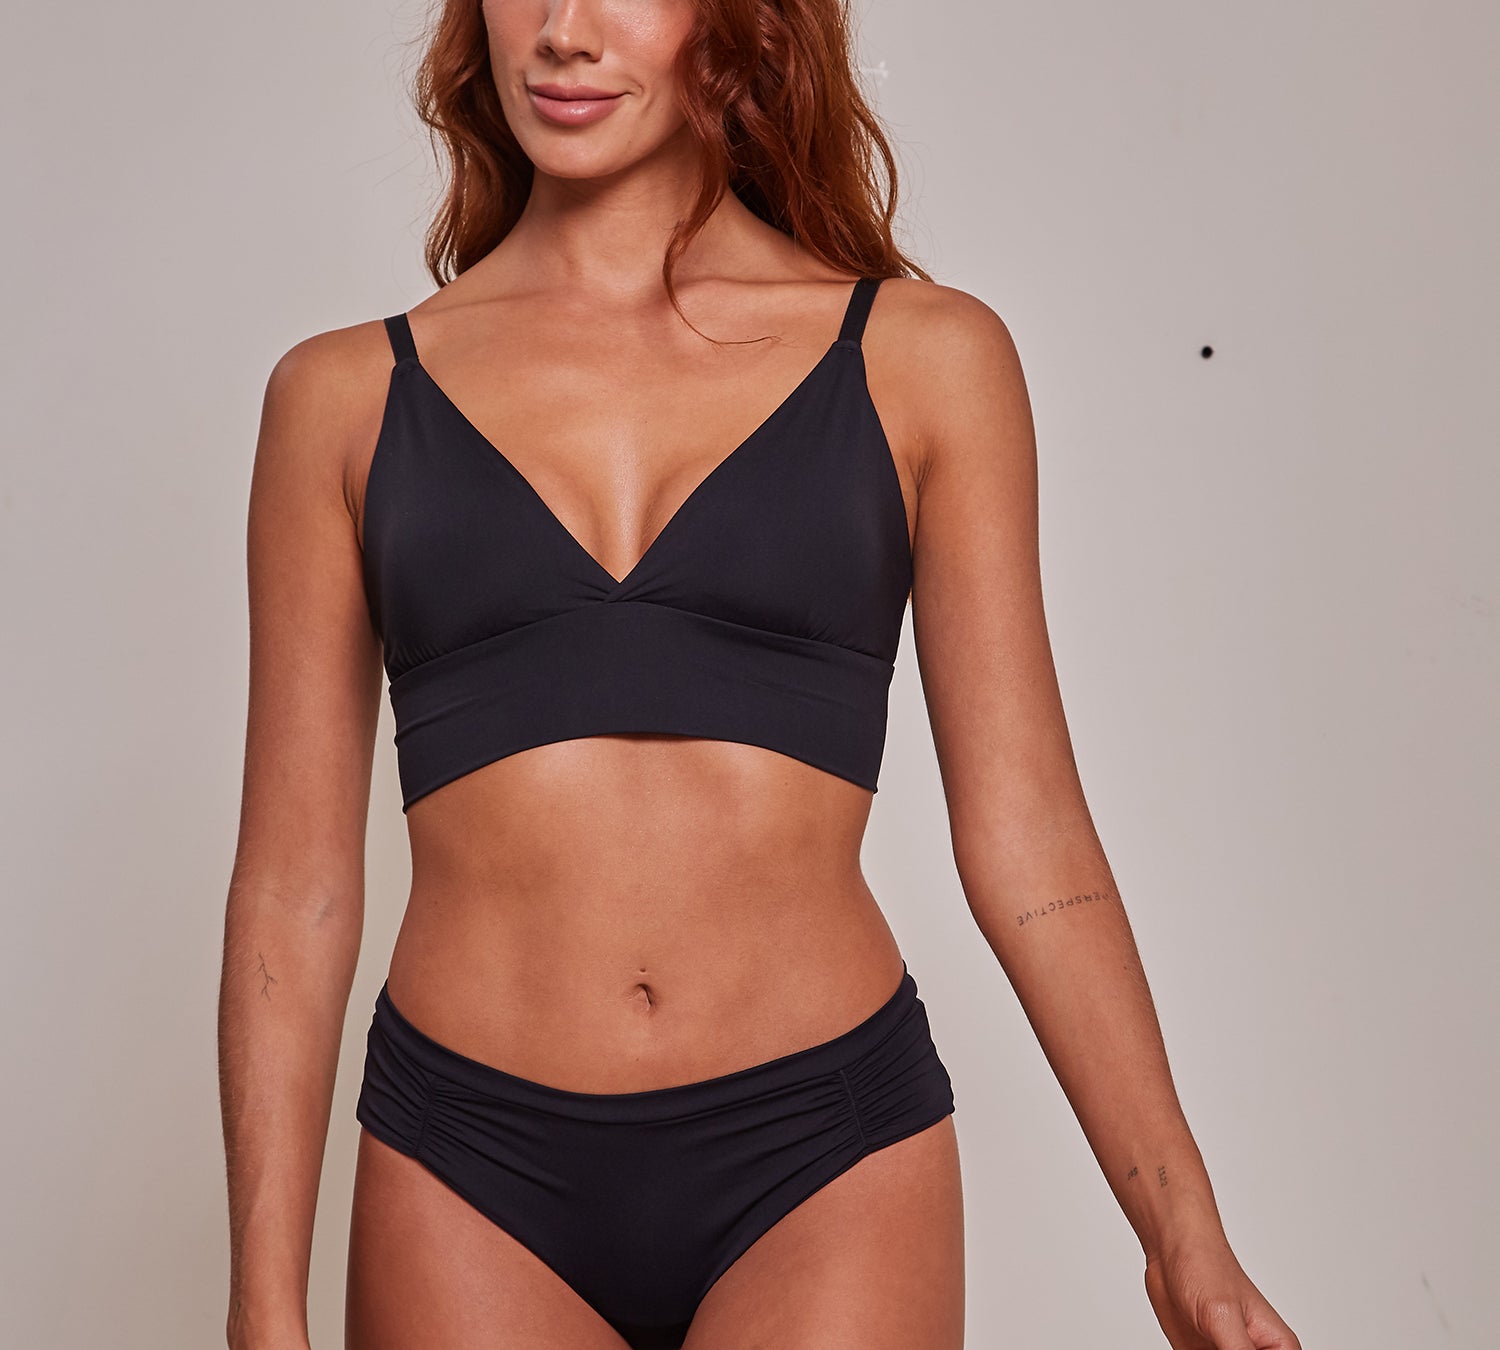 Versatile Top brasier for support and Coverage